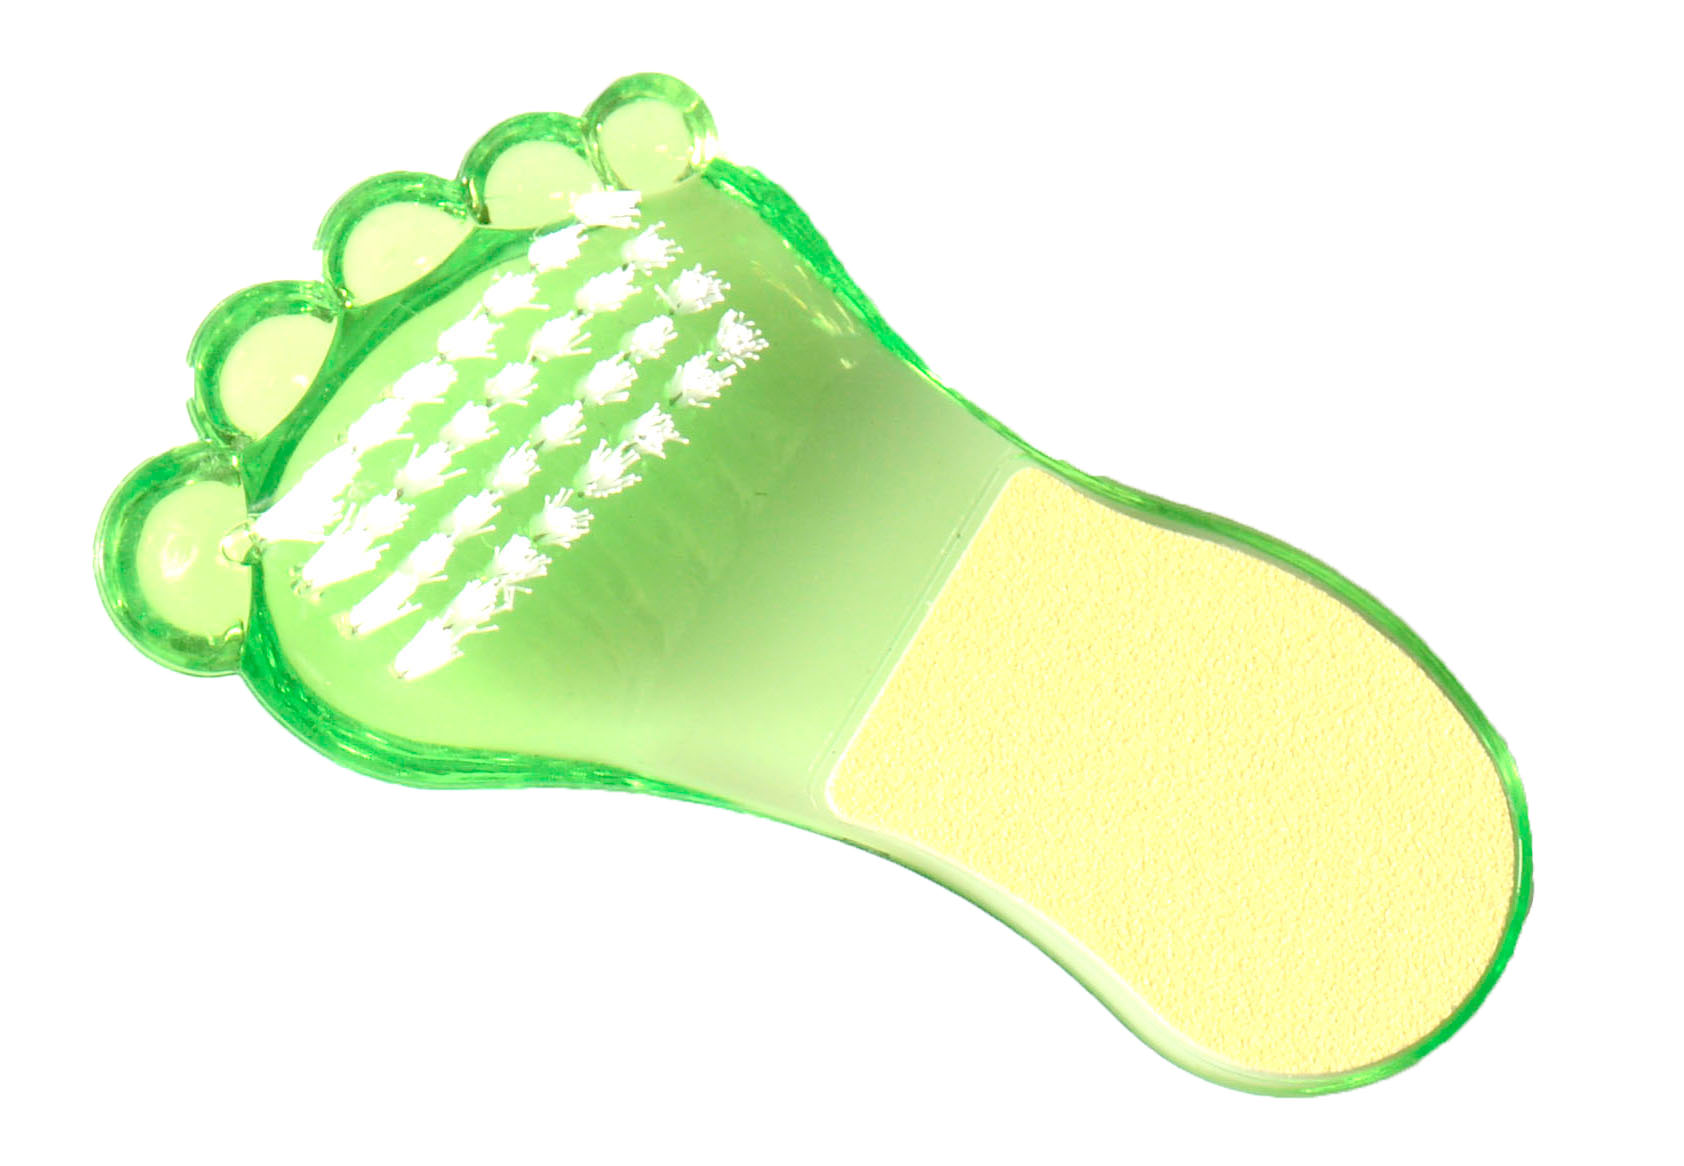 Excellent foot file and brush